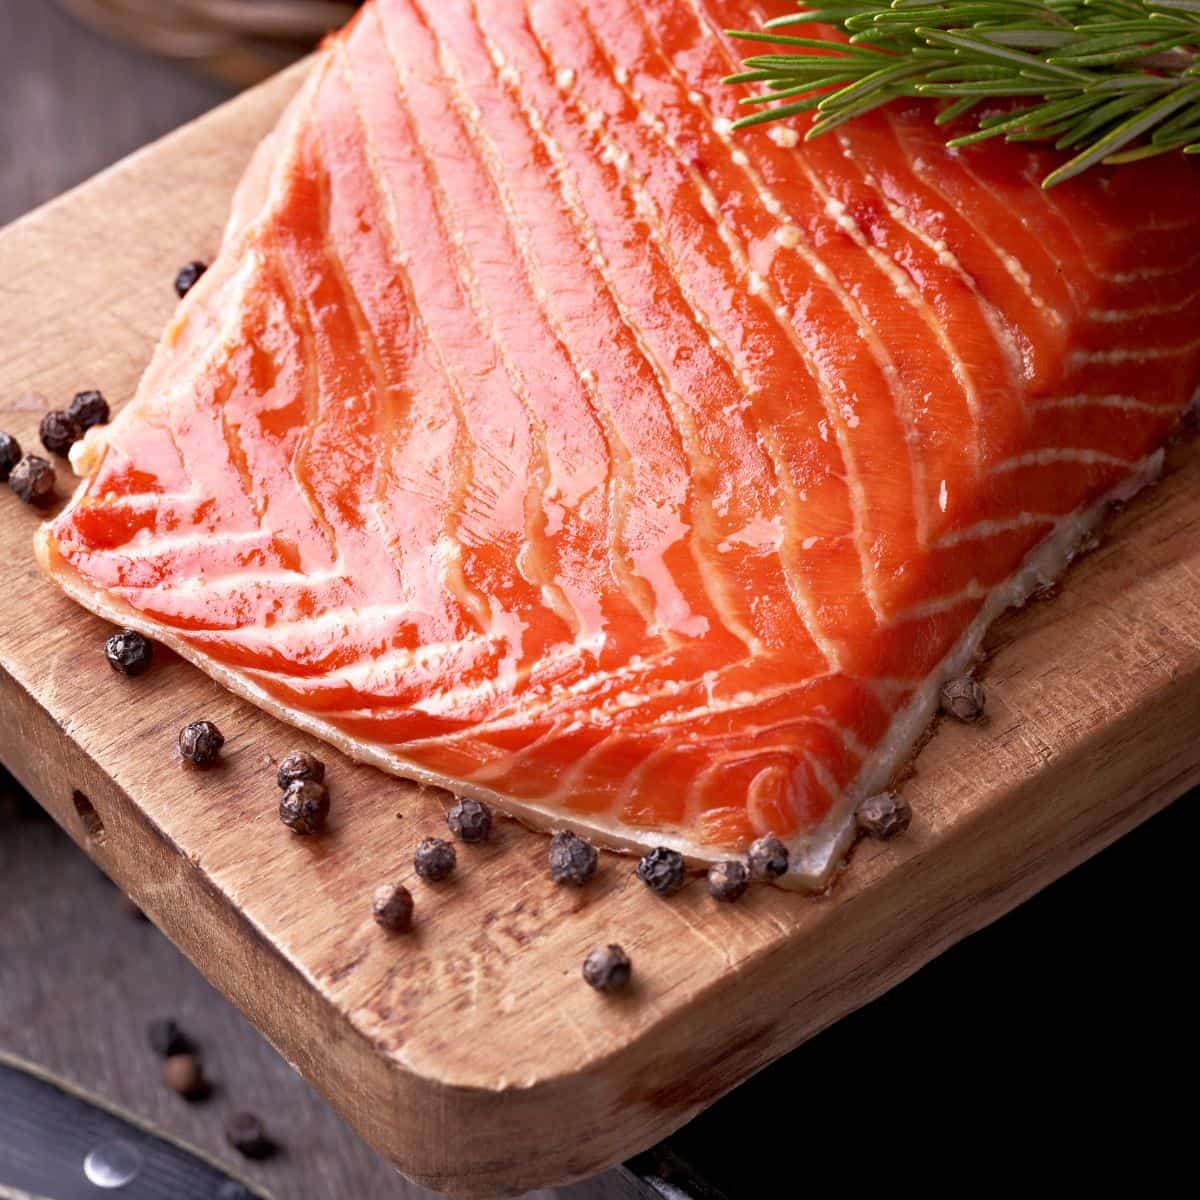 A raw filet of wild-caught salmon on a wooden slab surrounded by peppercorn decoratively